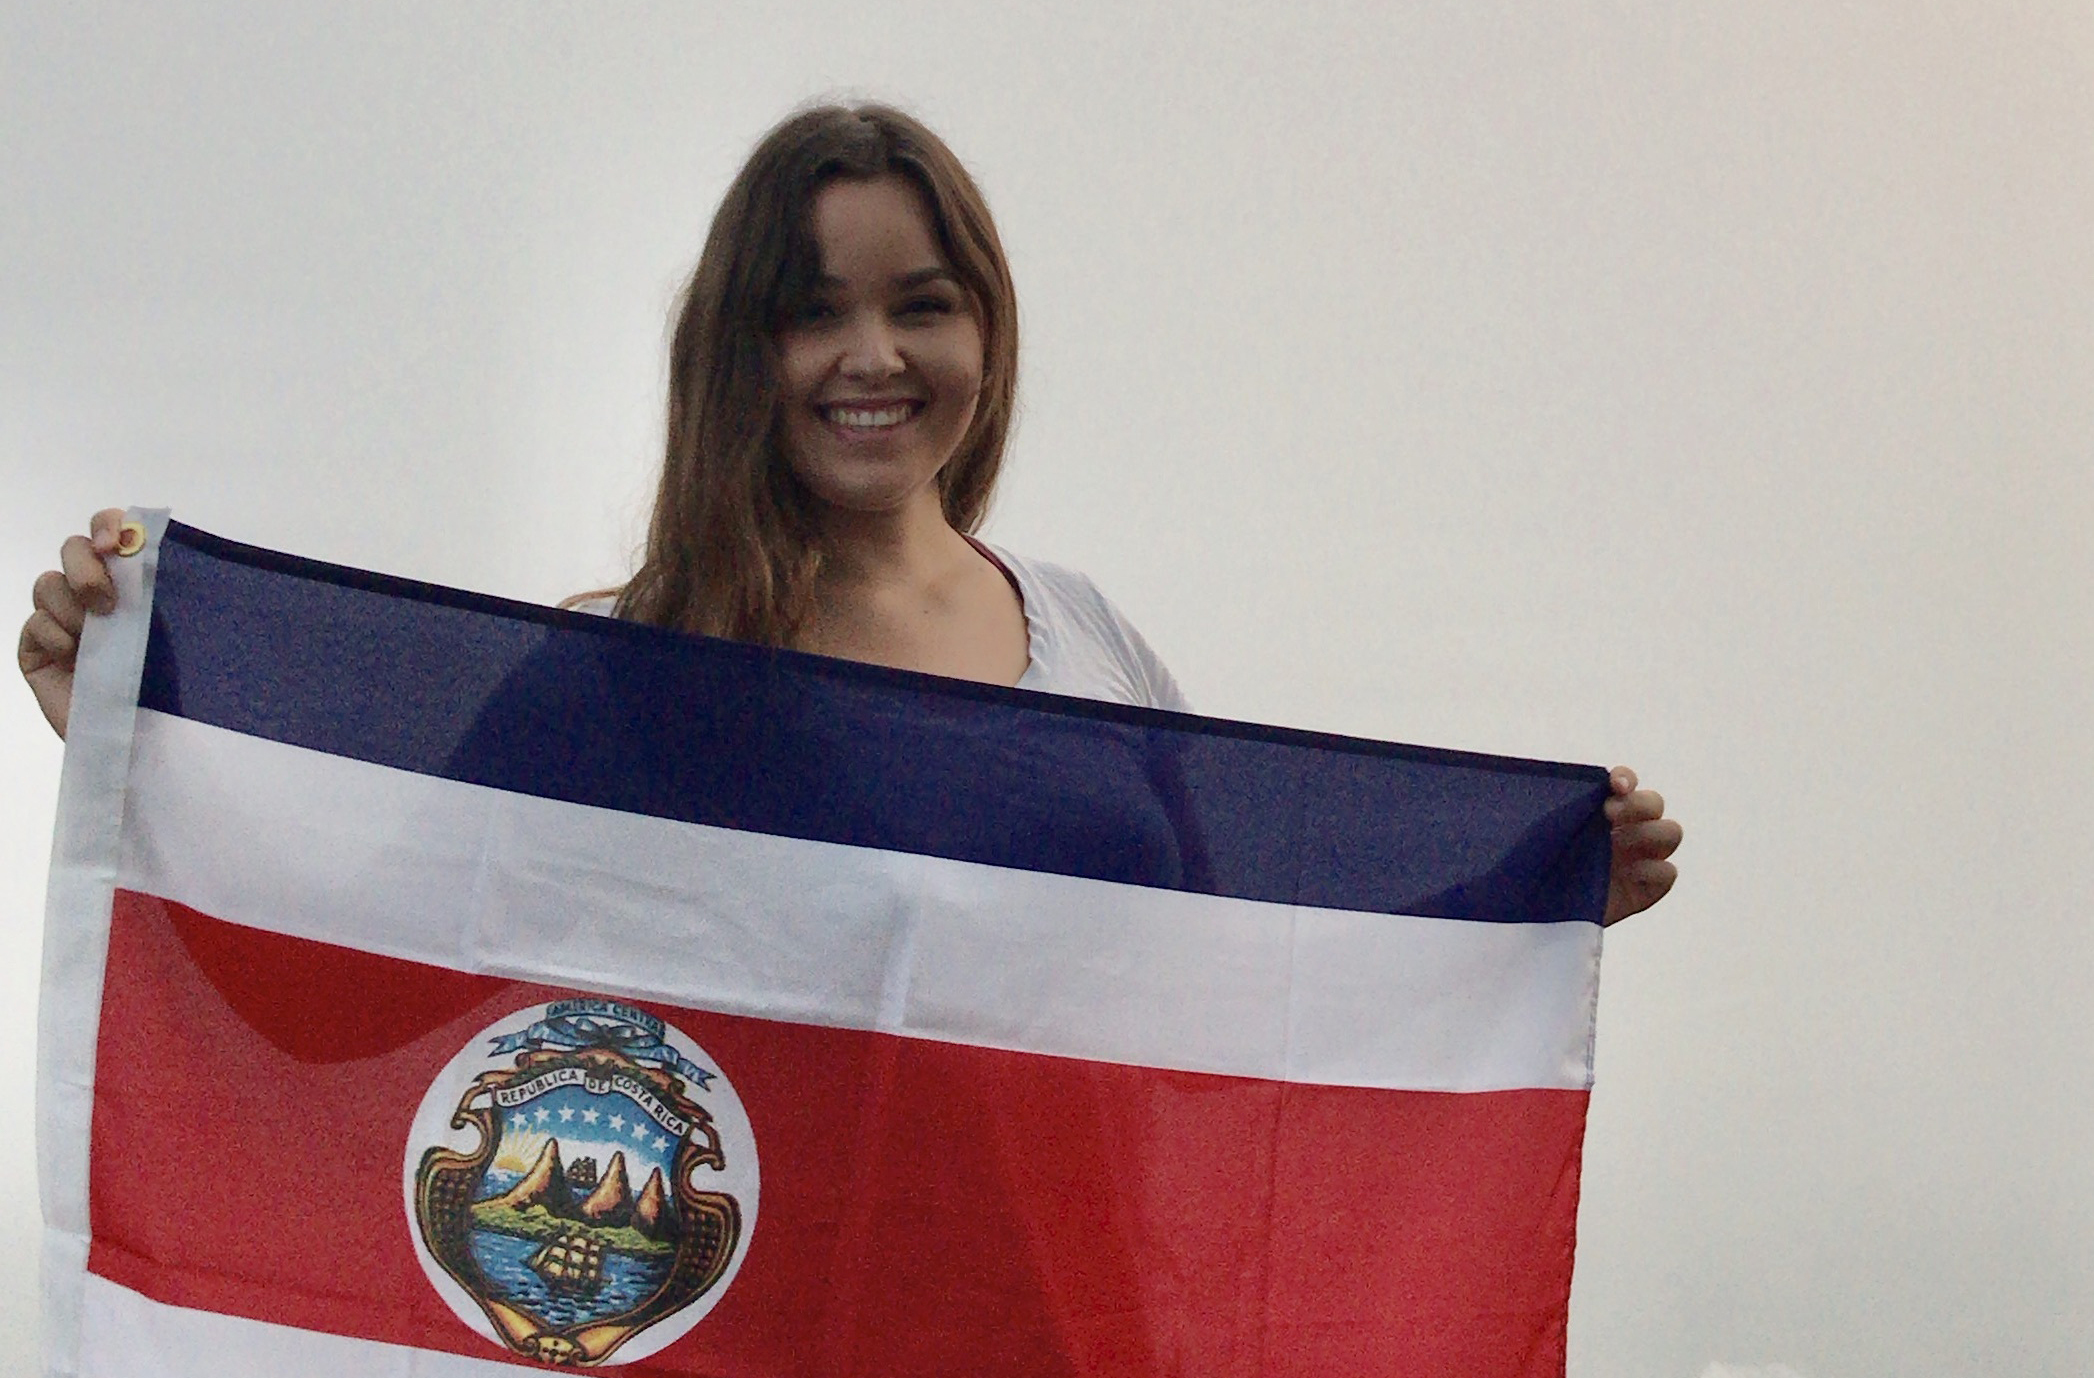 A college student smiles while holding a country's flag.